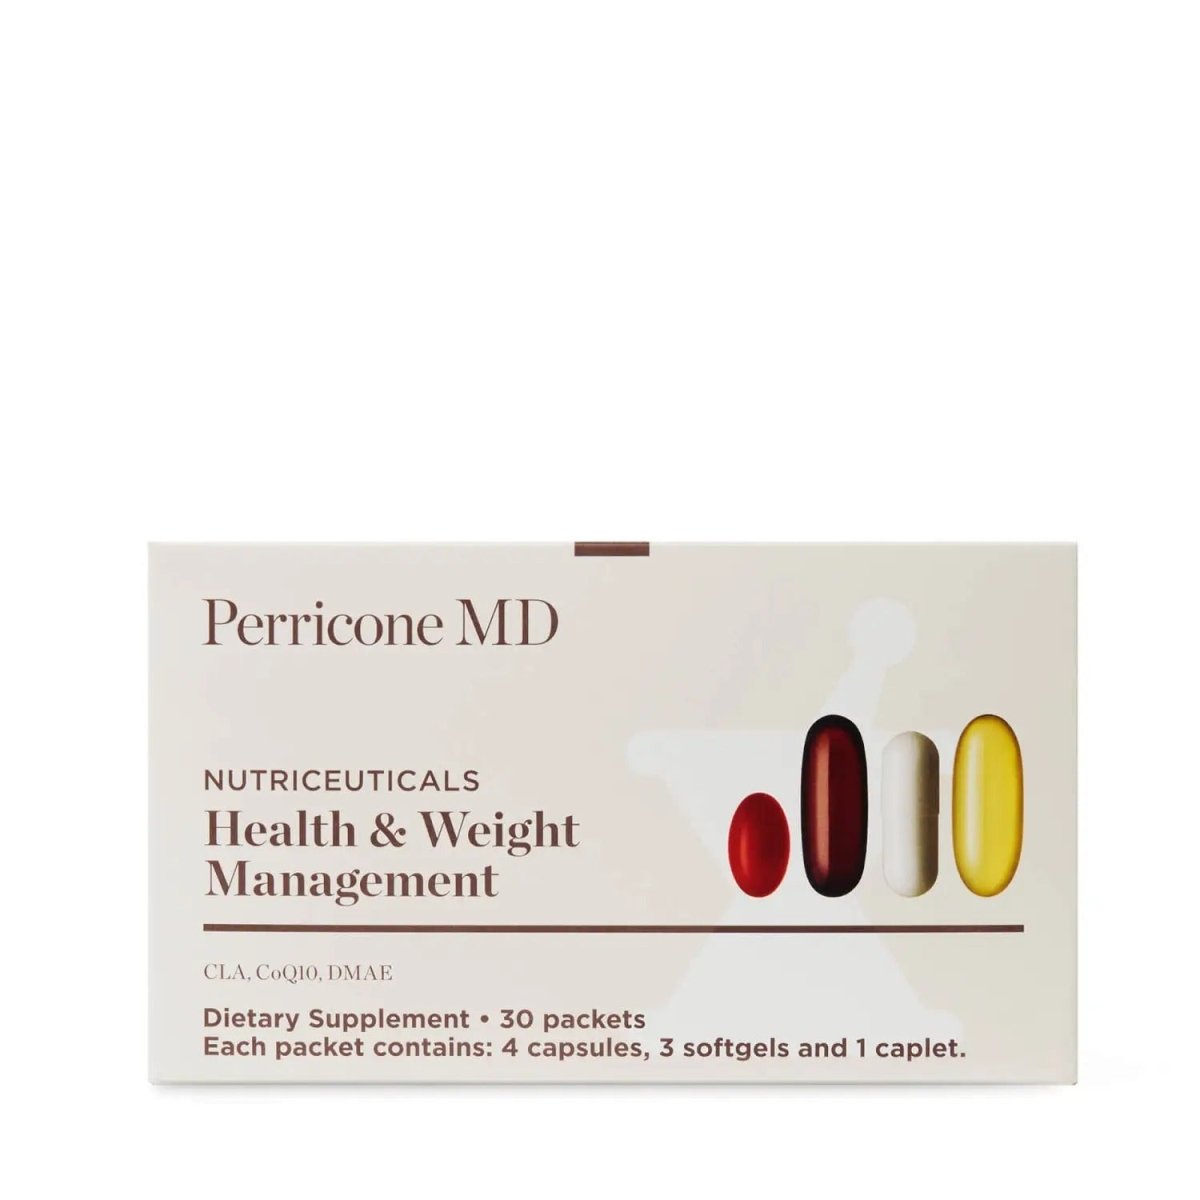 Perricone MD Health and Weight Management Supplements - SkincareEssentials